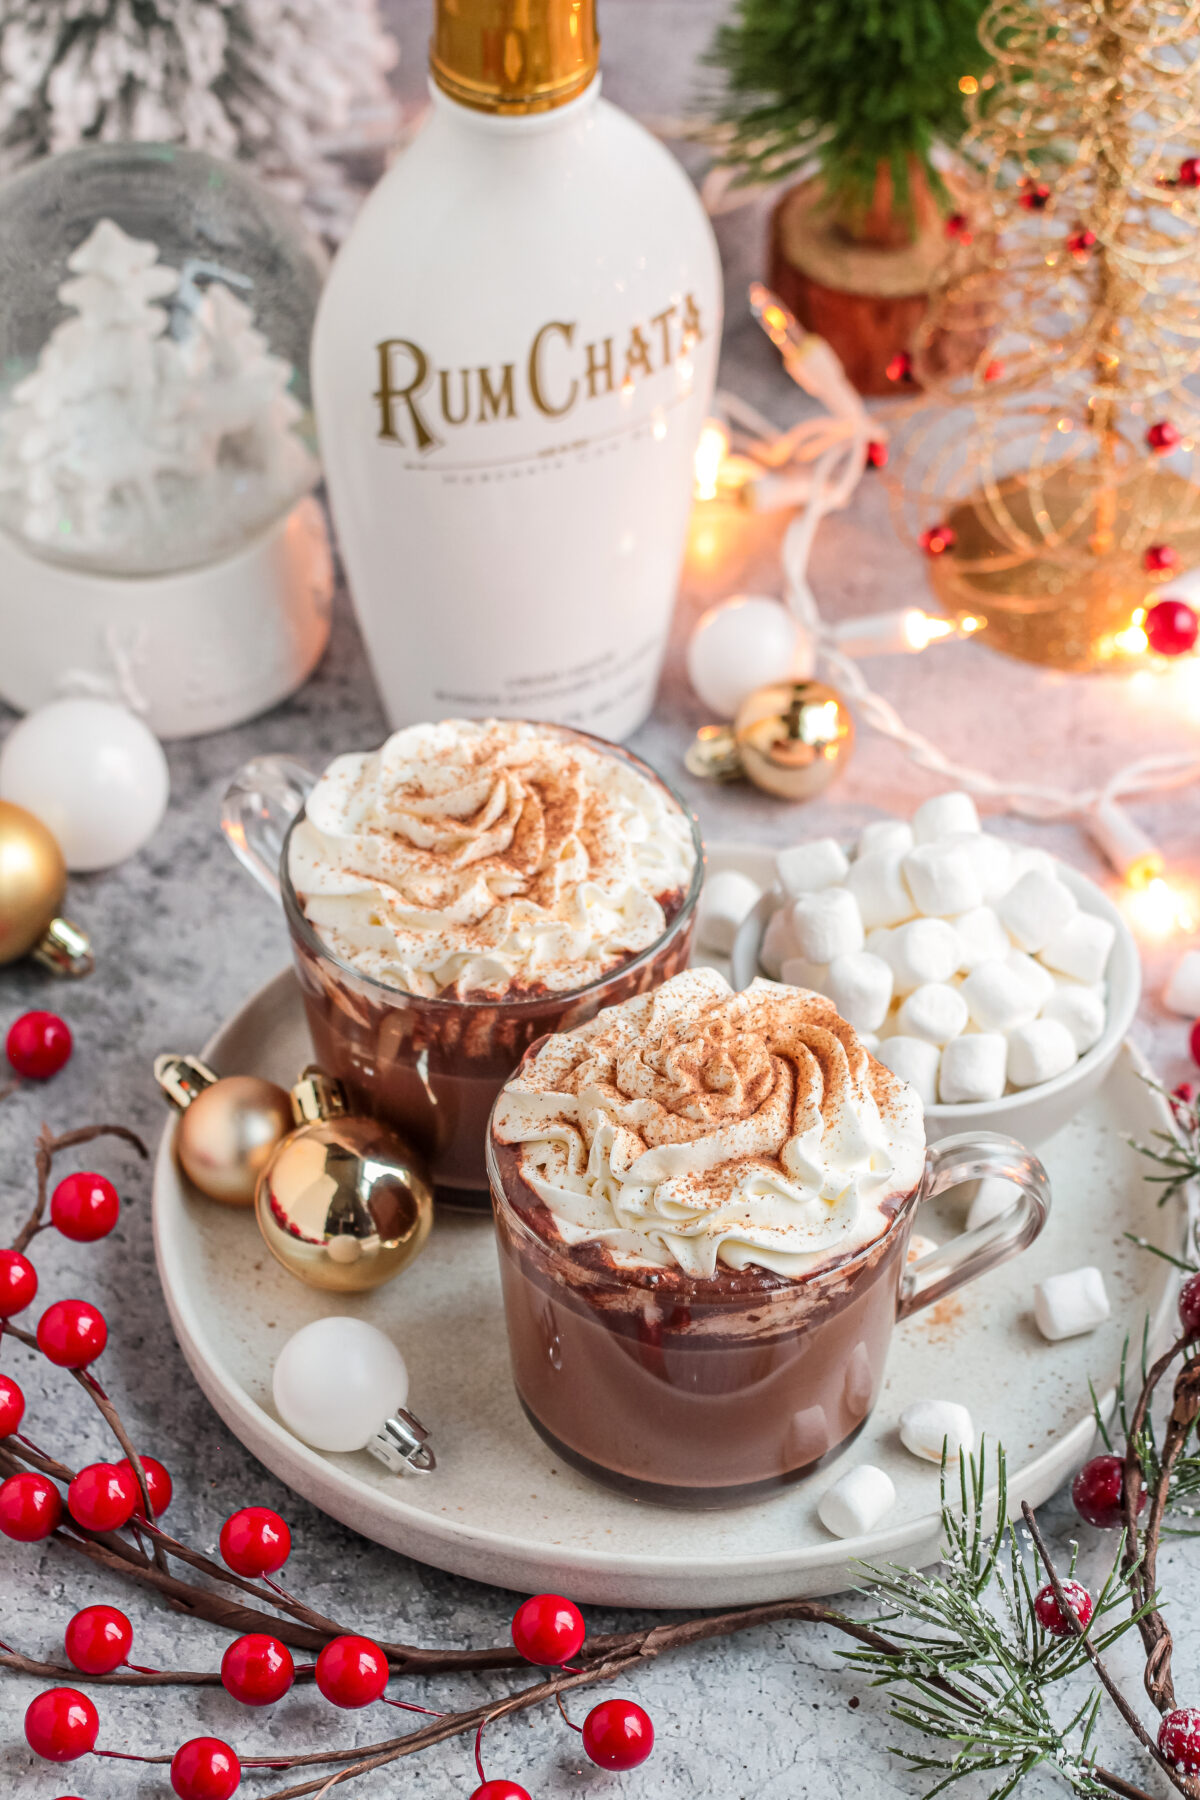 Try my easy recipe for the perfect holiday party drink. This RumChata hot cocoa is a fun twist on traditional hot chocolate!